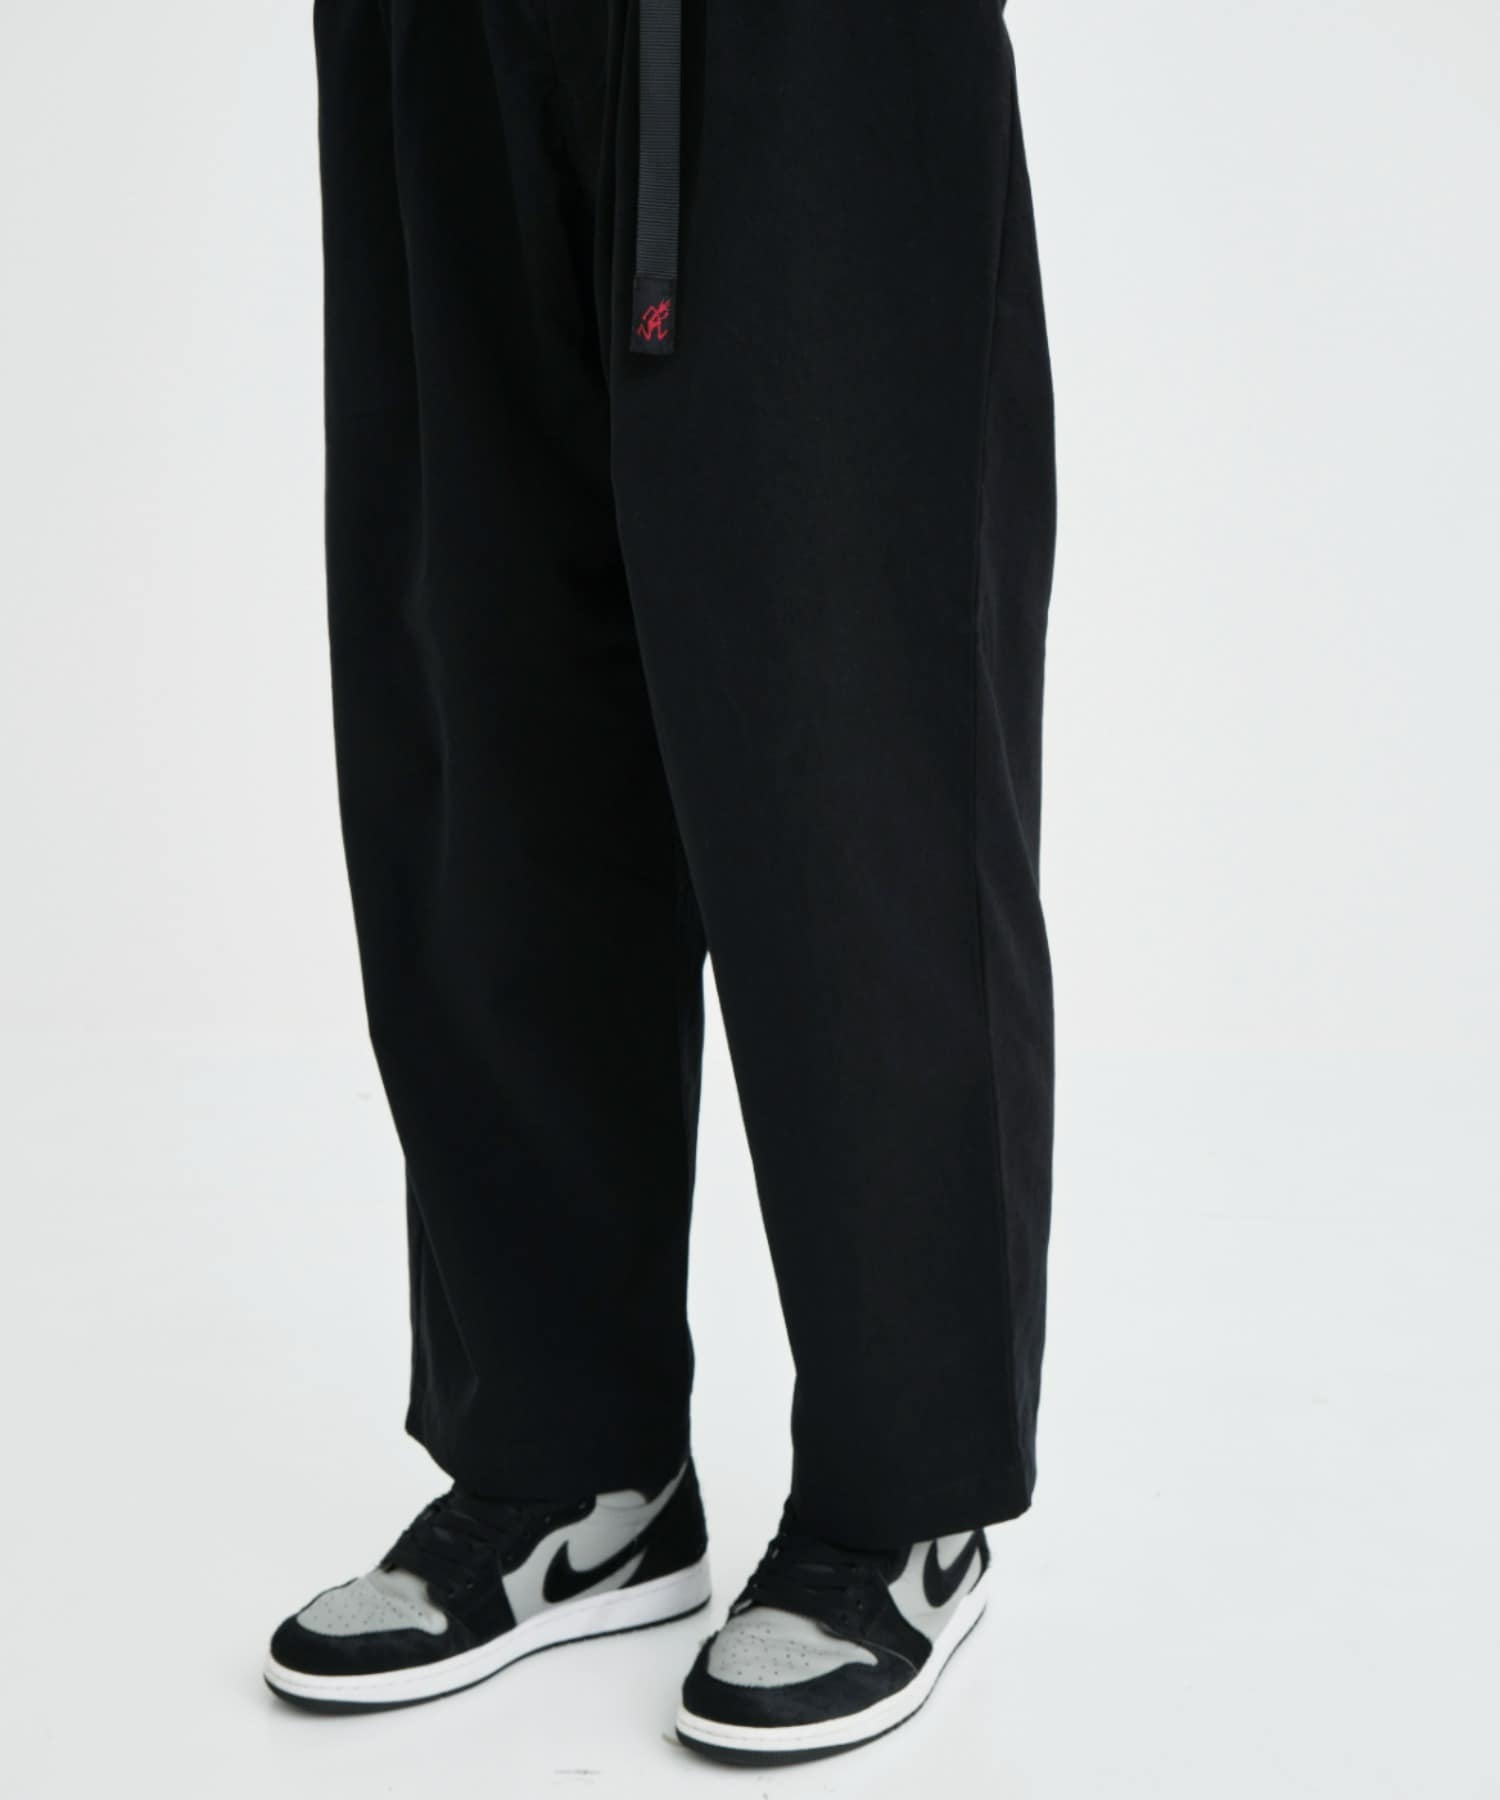 Gramicci STRETCH 3 TUCK PANTS ｜ White Mountaineering